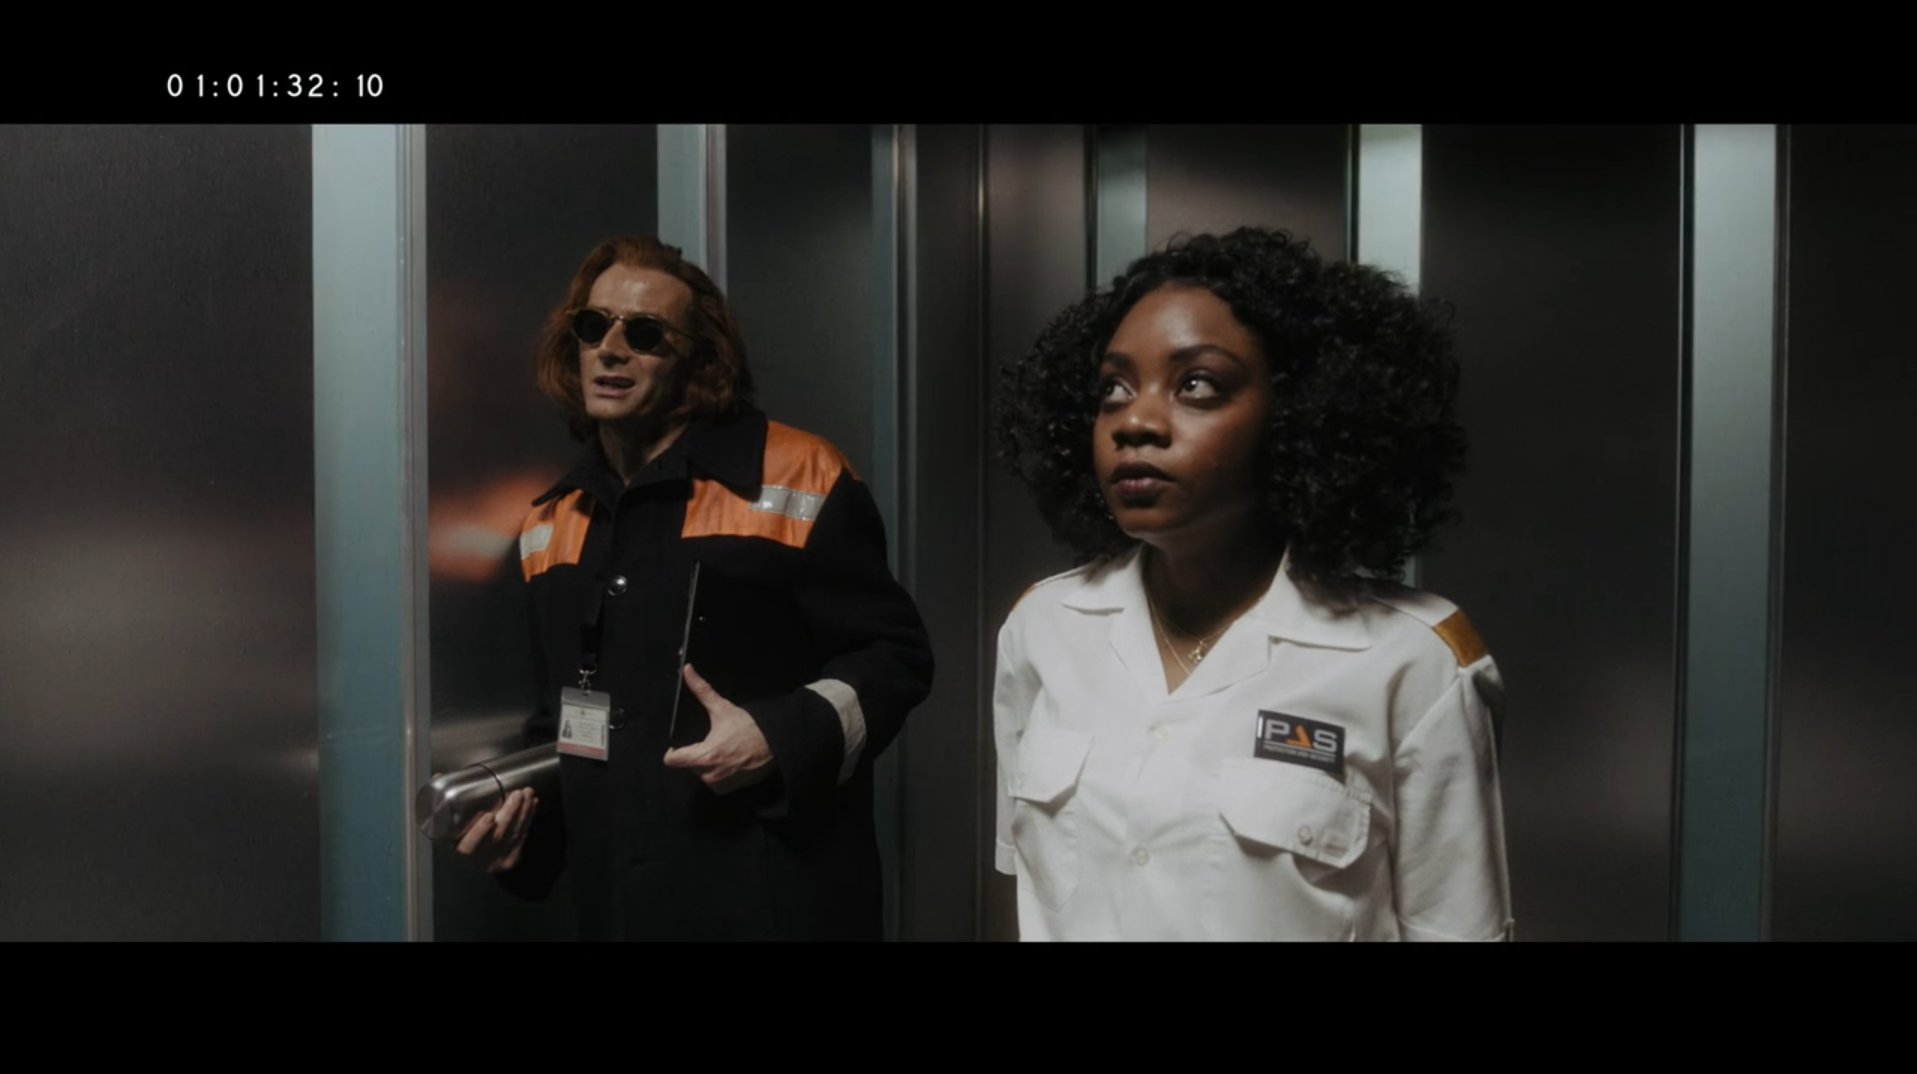 Good Omens deleted scene where Crowley and a cell tower employee ride the elevator up to the control room. Crowley is wearing his signature orange mischief-causing jacket and carrying a stainless steel thermos